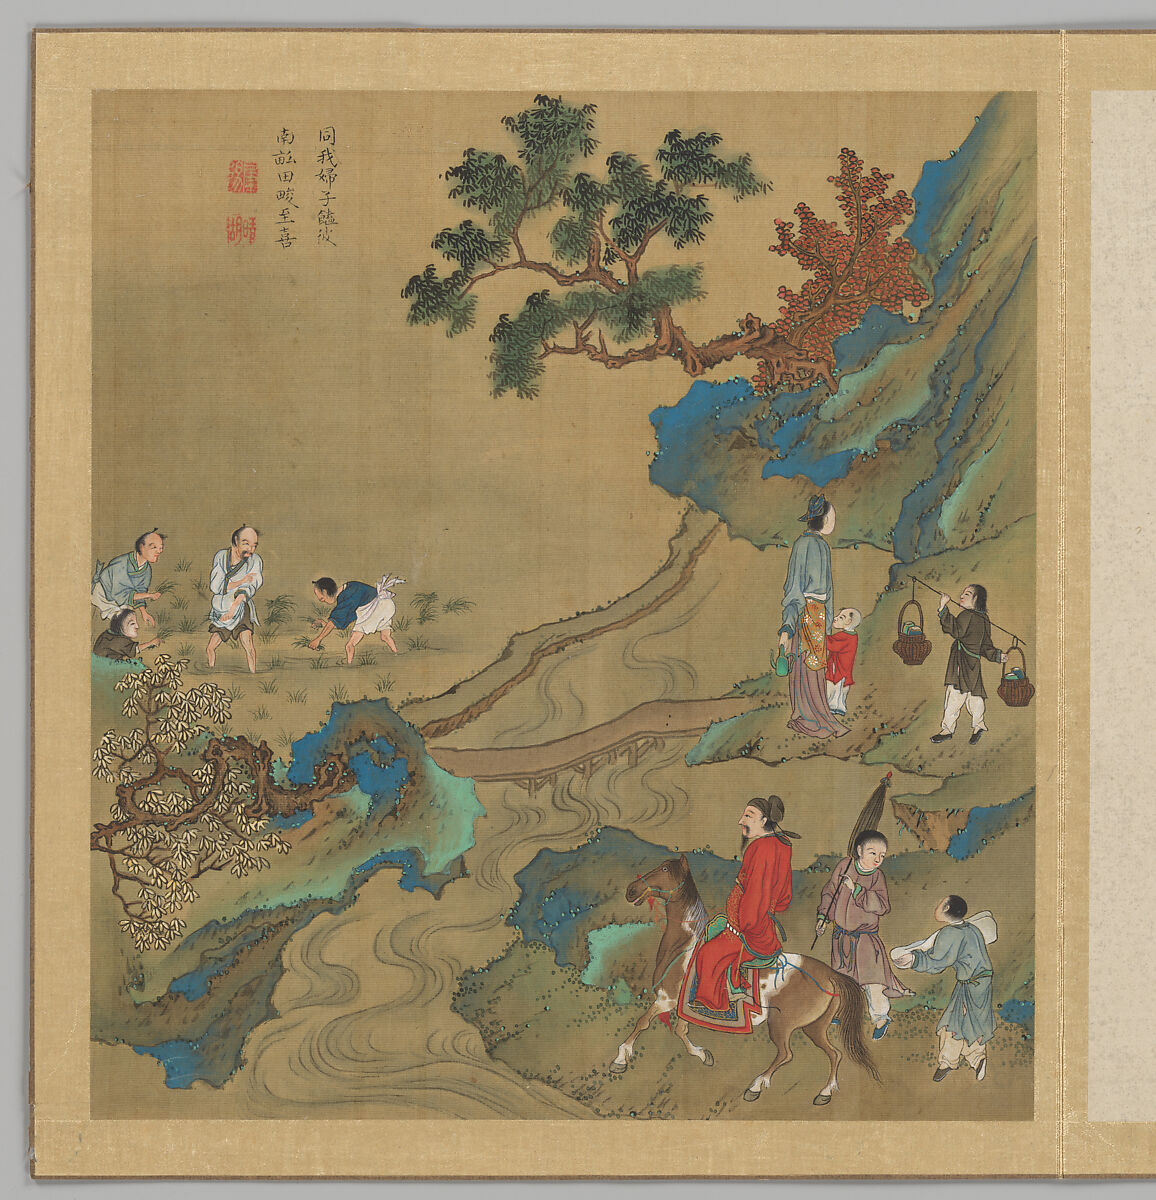 Odes of the State of Bin: The Seventh Month, Fei Qinghu (Fei Zhaoyang) (Chinese, active late 18th--early 19th century), Album of twenty leaves; ink and color on silk, China 